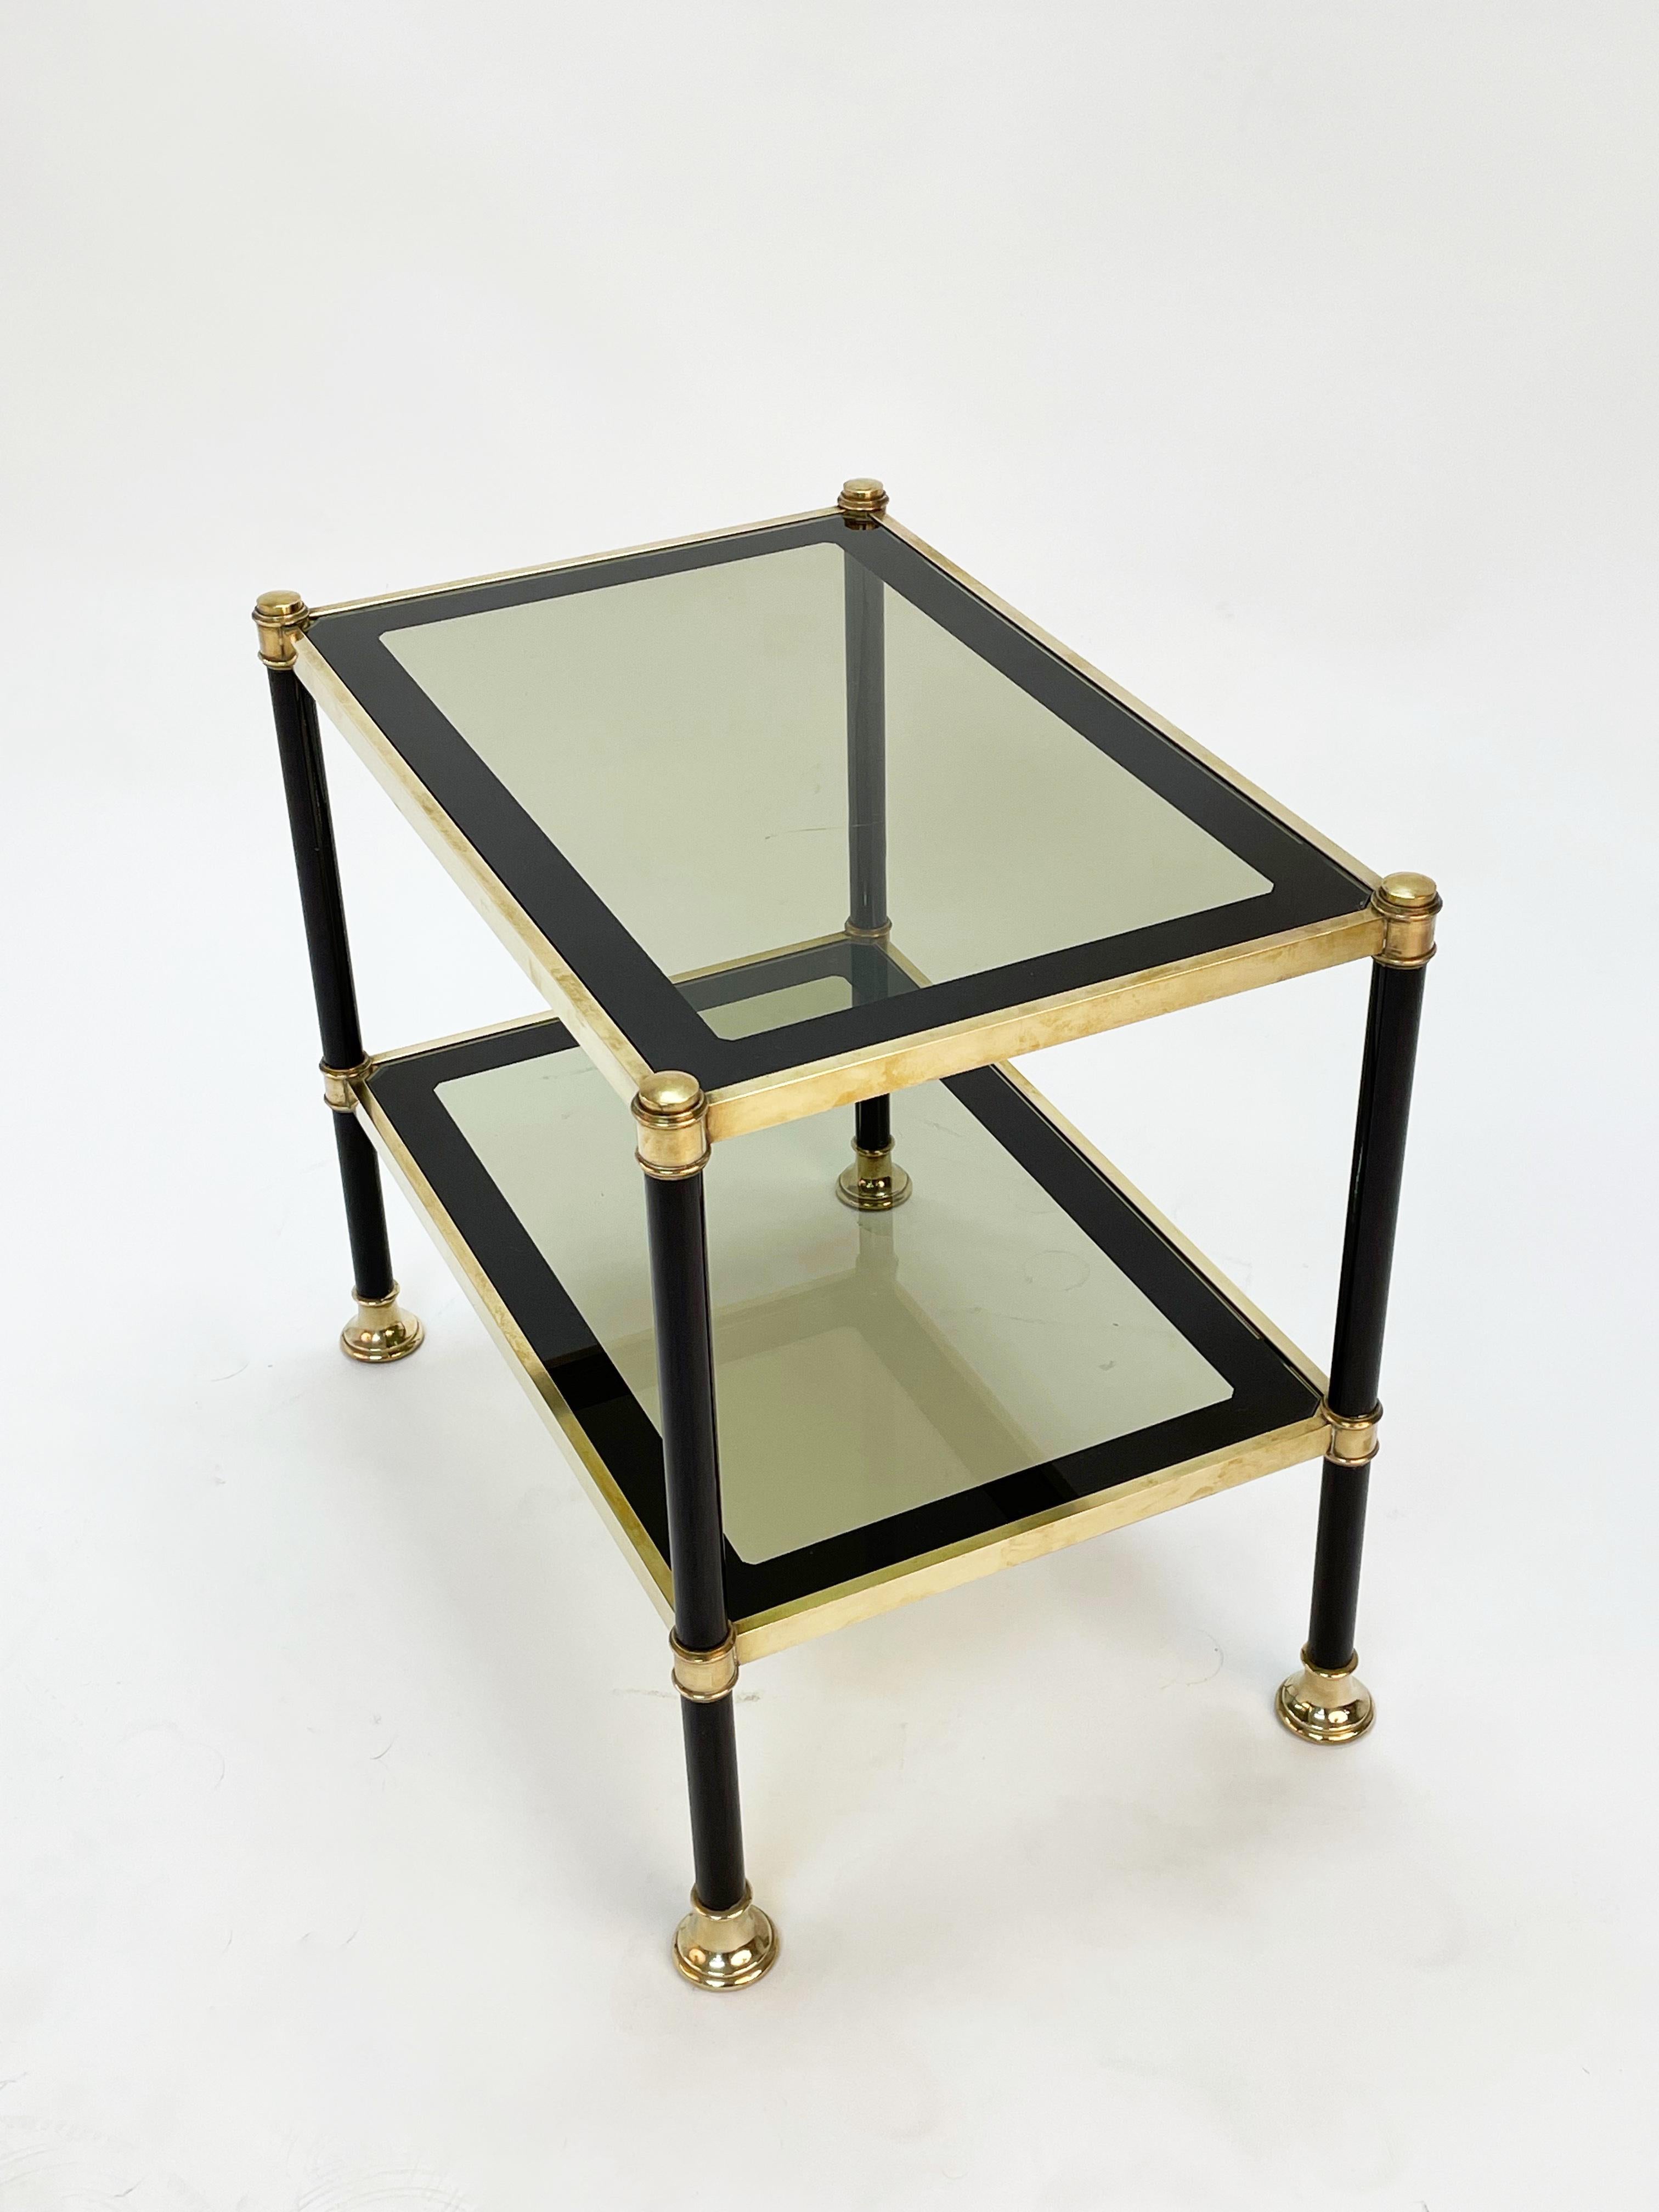 Midcentury Brass and Black Metal Rectangular Coffee Table with Smoked Glass 1970 For Sale 6